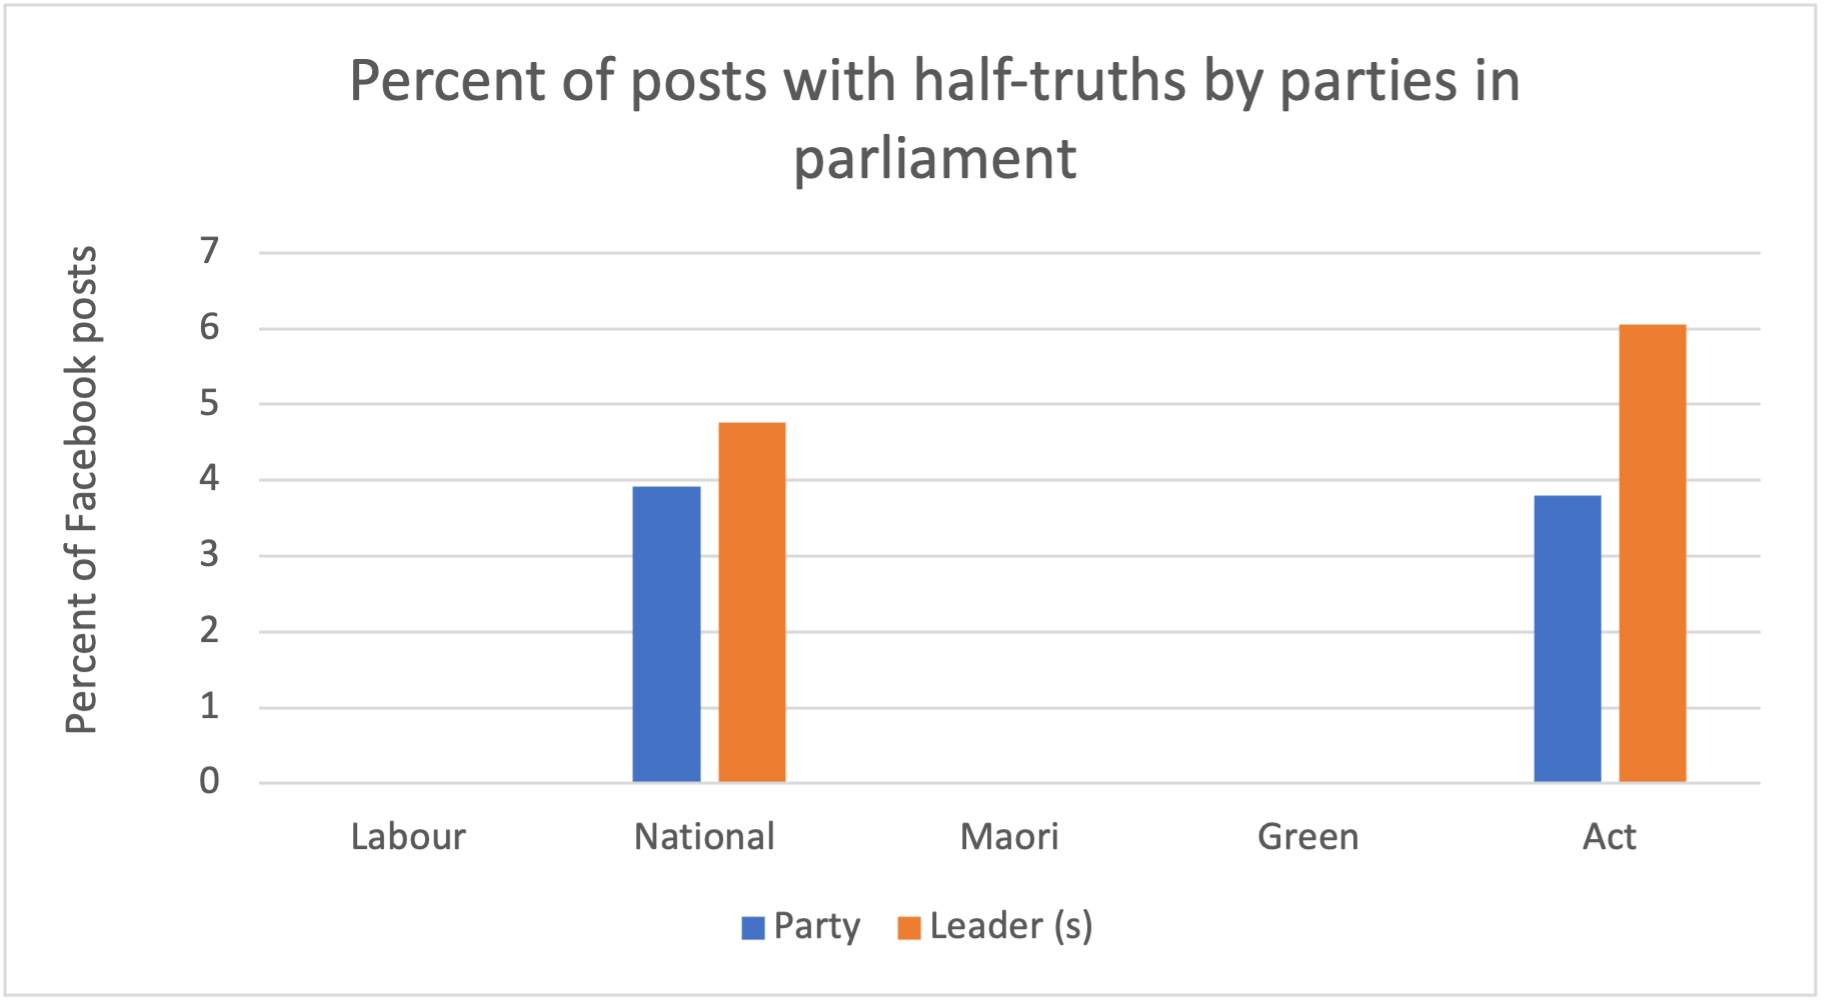 Percent of posts with half-truths by parties in parliament